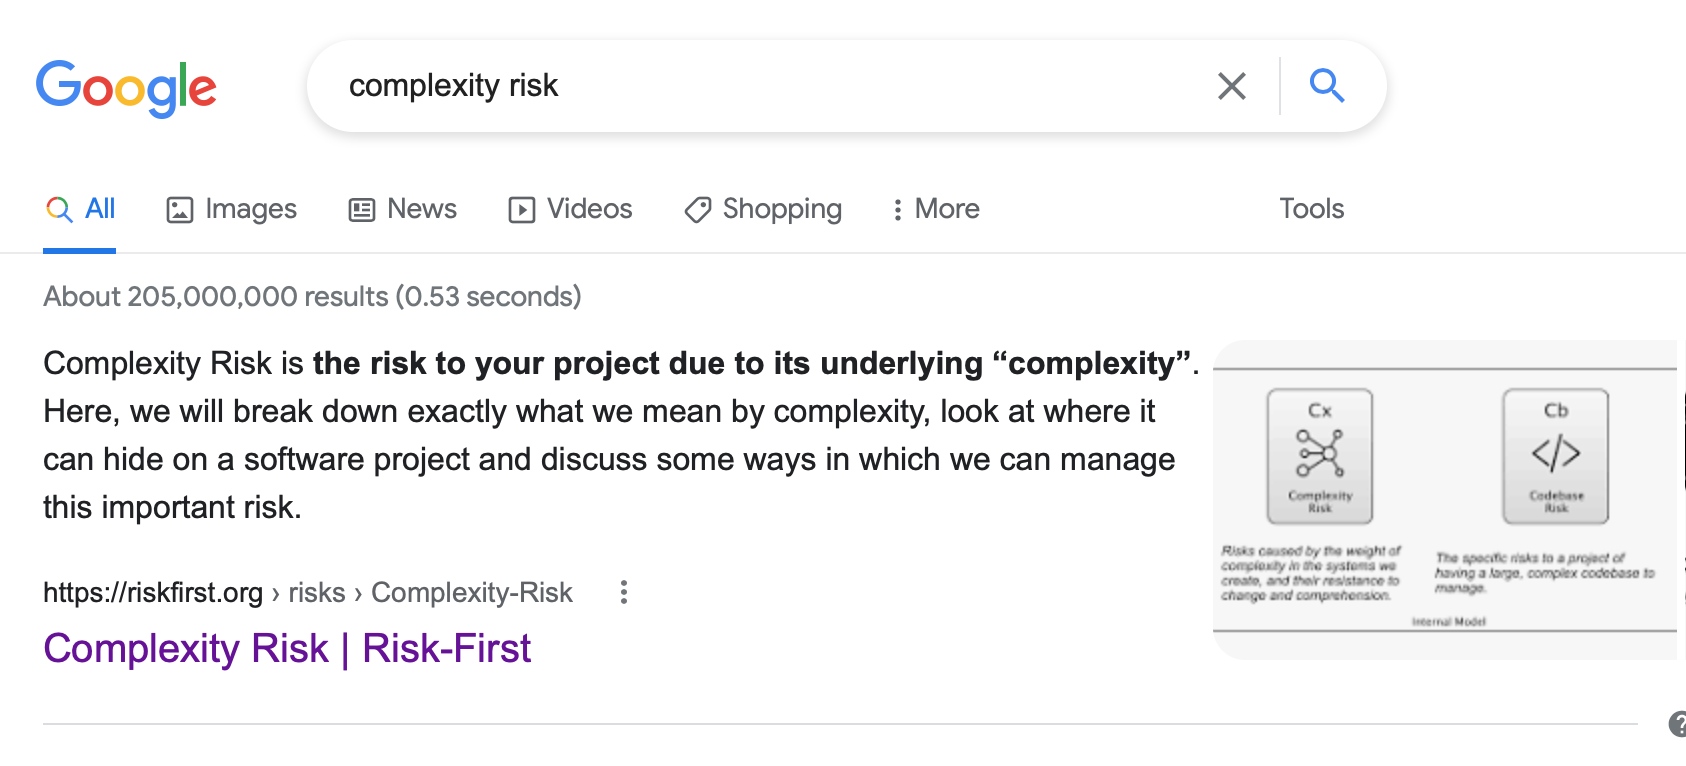 Google Search for Complexity Risk